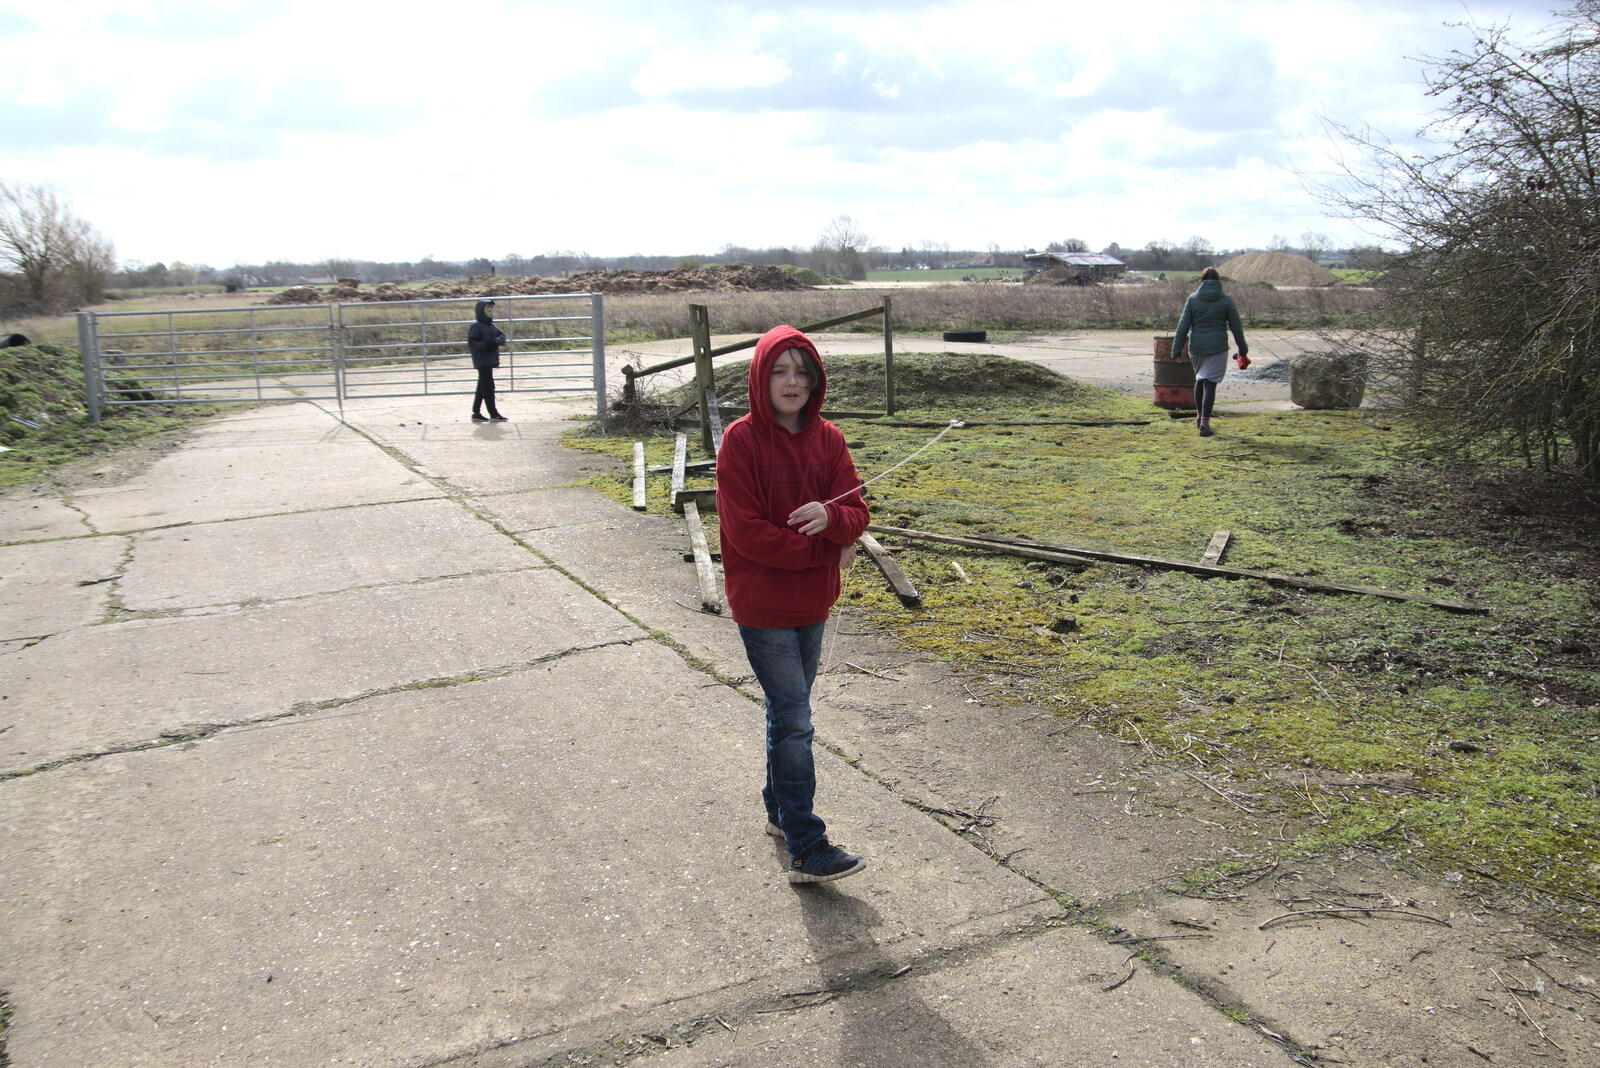 Fred waves a magnet on a string around from Another Walk on Eye Airfield, Eye, Suffolk - 14th March 2021